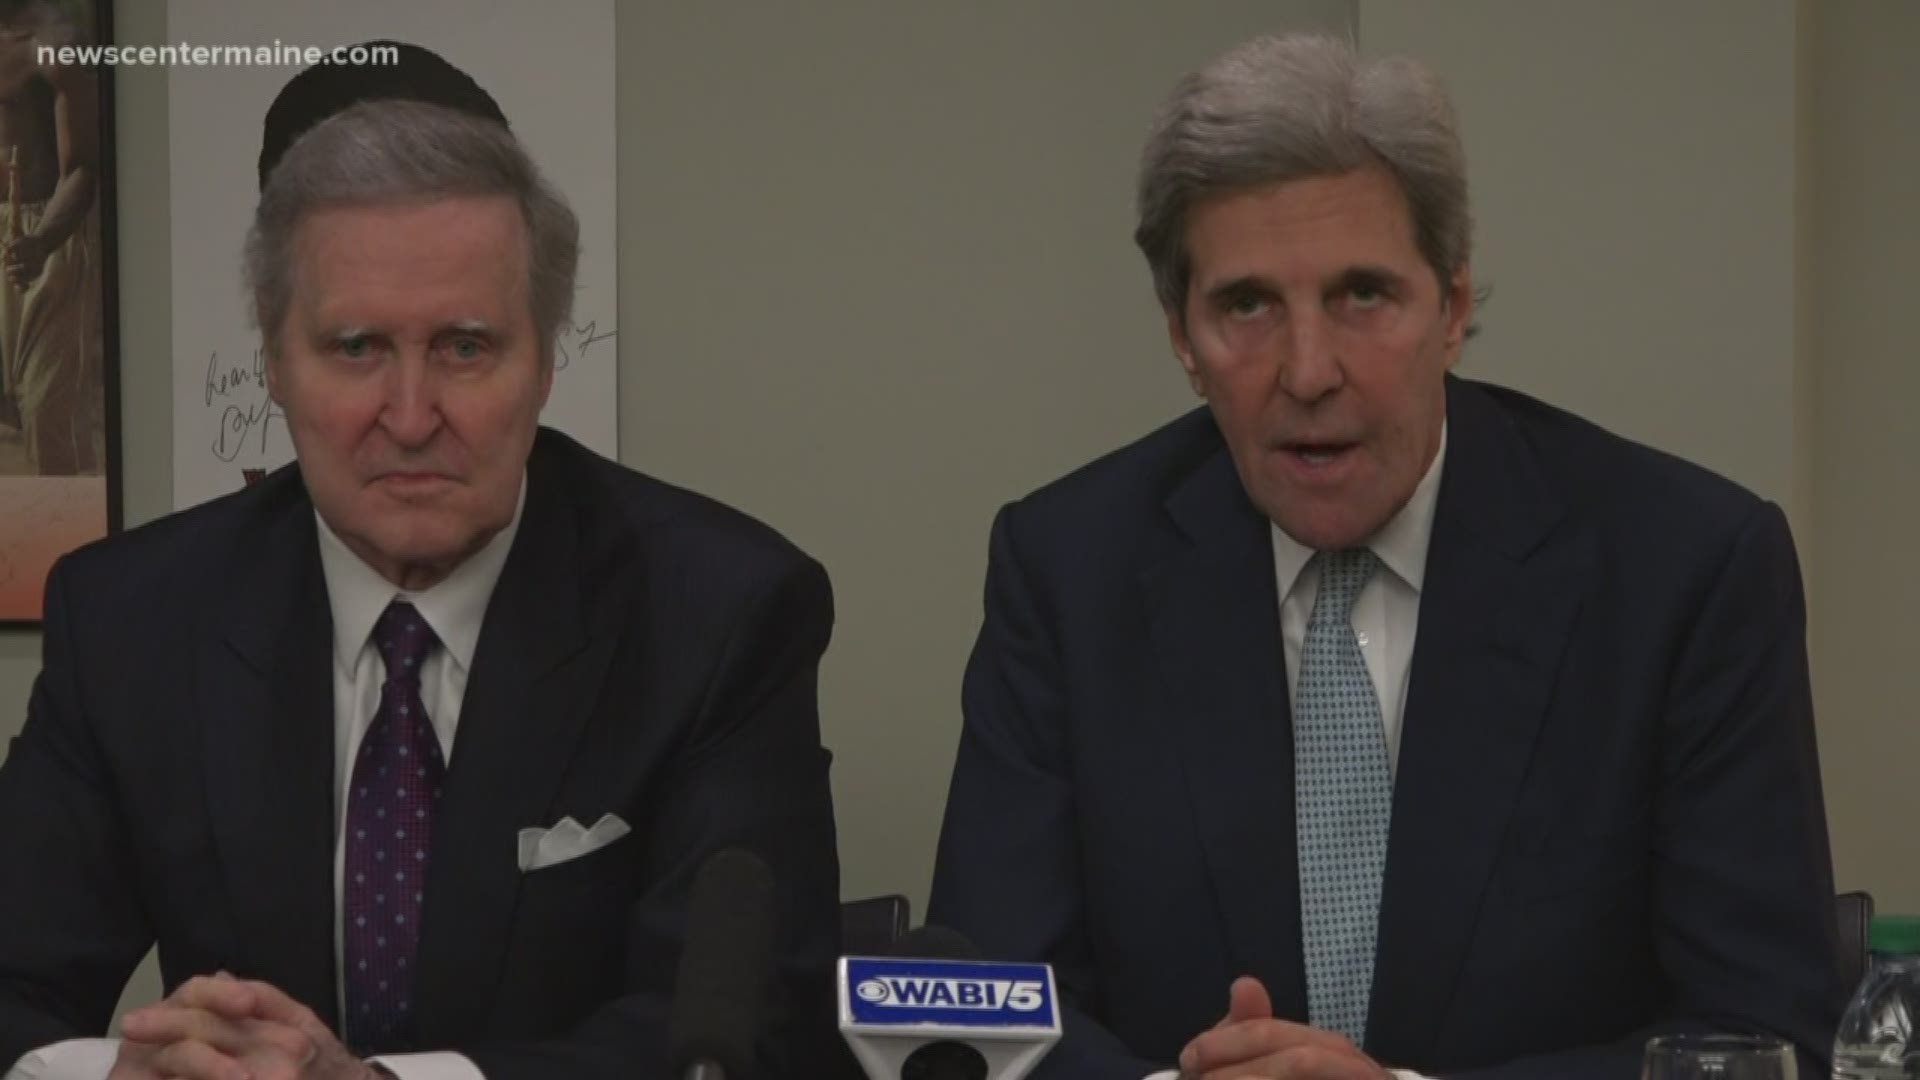 Former Secretary of State John Kerry was invited to the University of Maine for a lecture with Former Secretary of Defense and Maine Senator Bill Cohen.